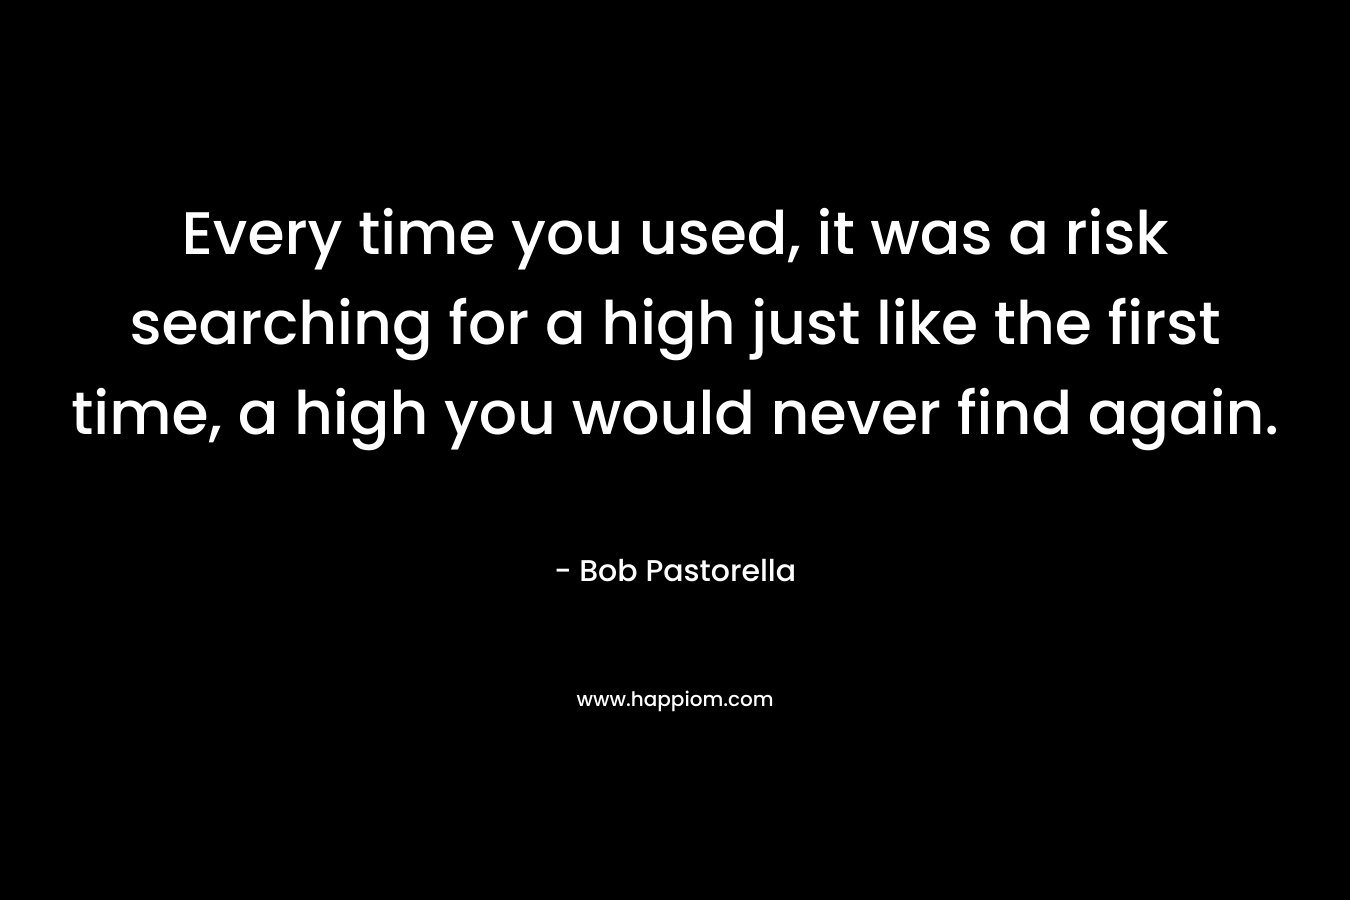 Every time you used, it was a risk searching for a high just like the first time, a high you would never find again.